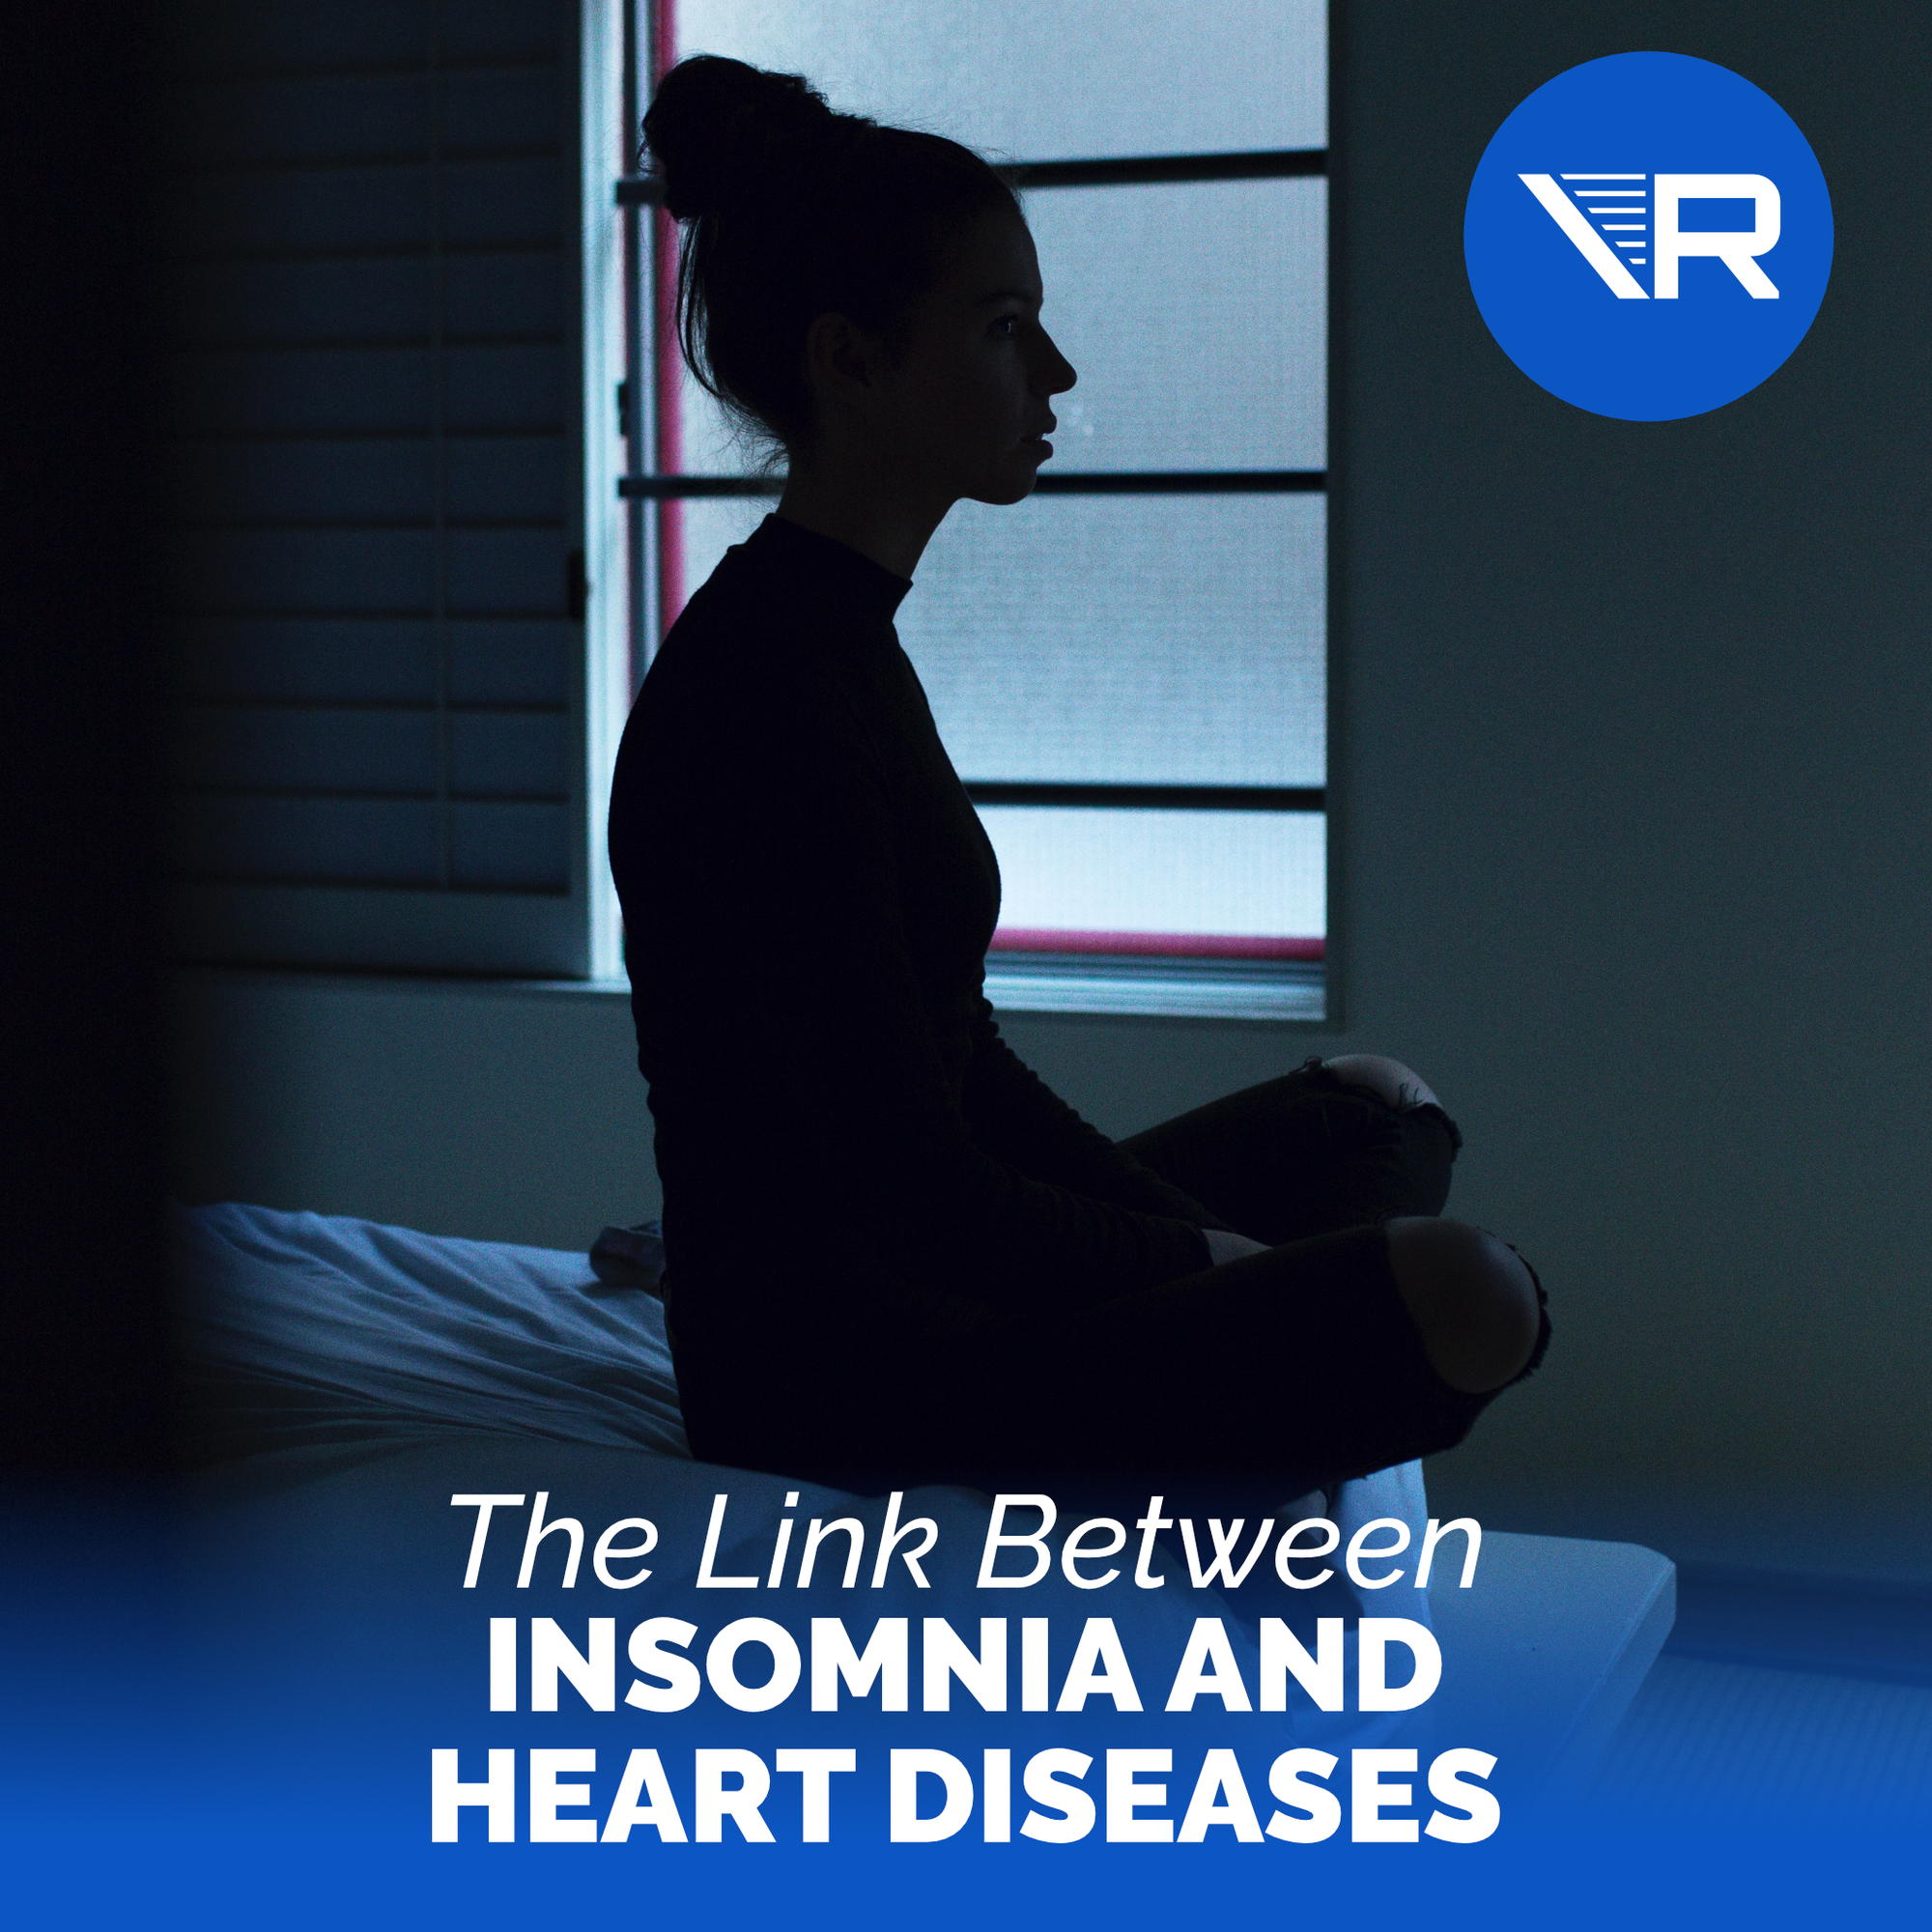 The Link Between Insomnia and Heart Diseases